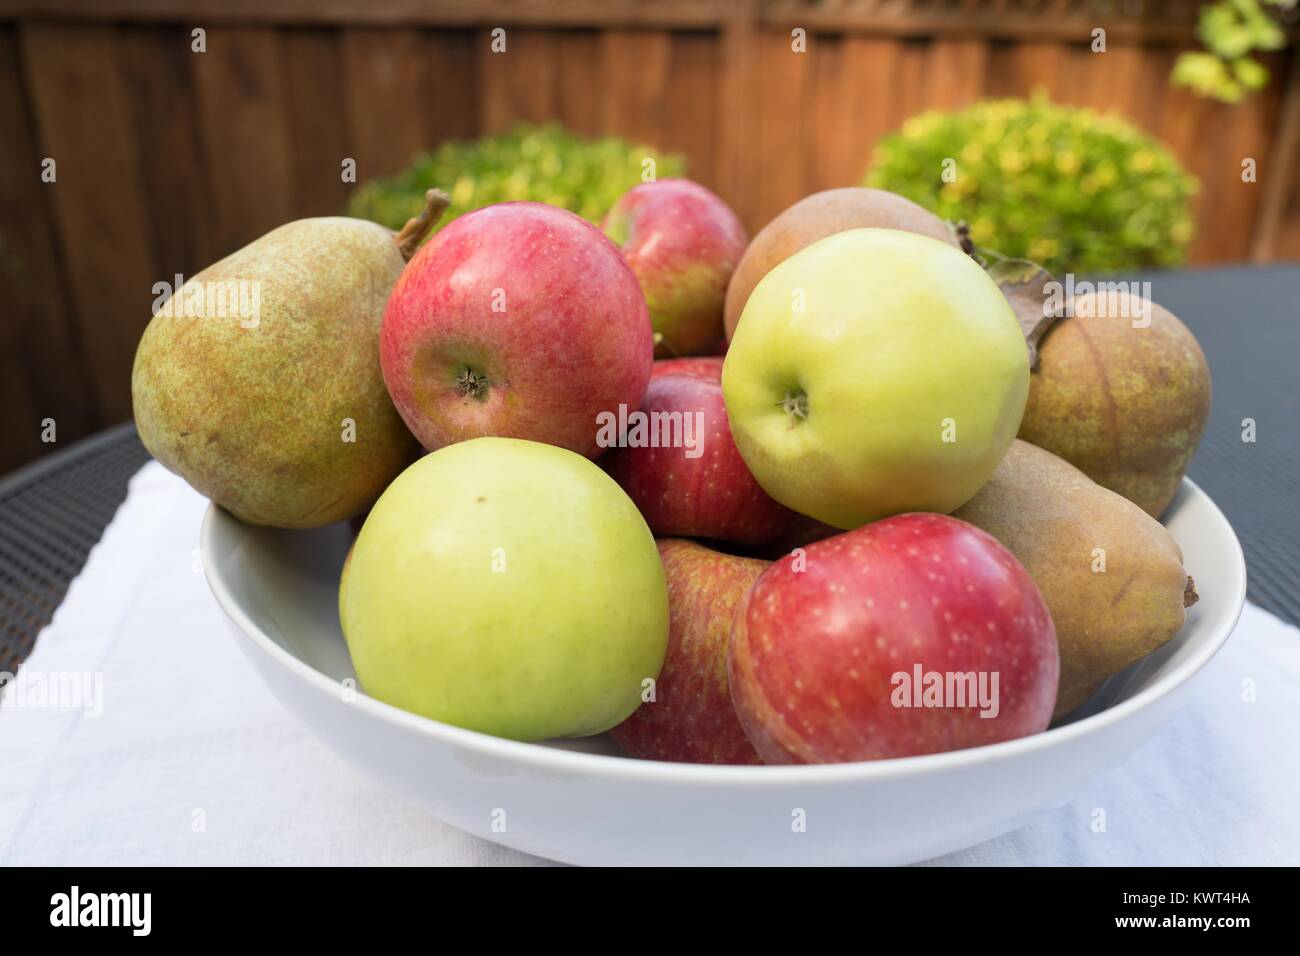 Bowl of multi colored apples on a table during the Jewish holiday of Rosh Hashanah (New Year), September 21, 2017. In the Jewish religion, apples are eaten on Rosh Hashanah to symbolize the sweetness of the coming year. Stock Photo